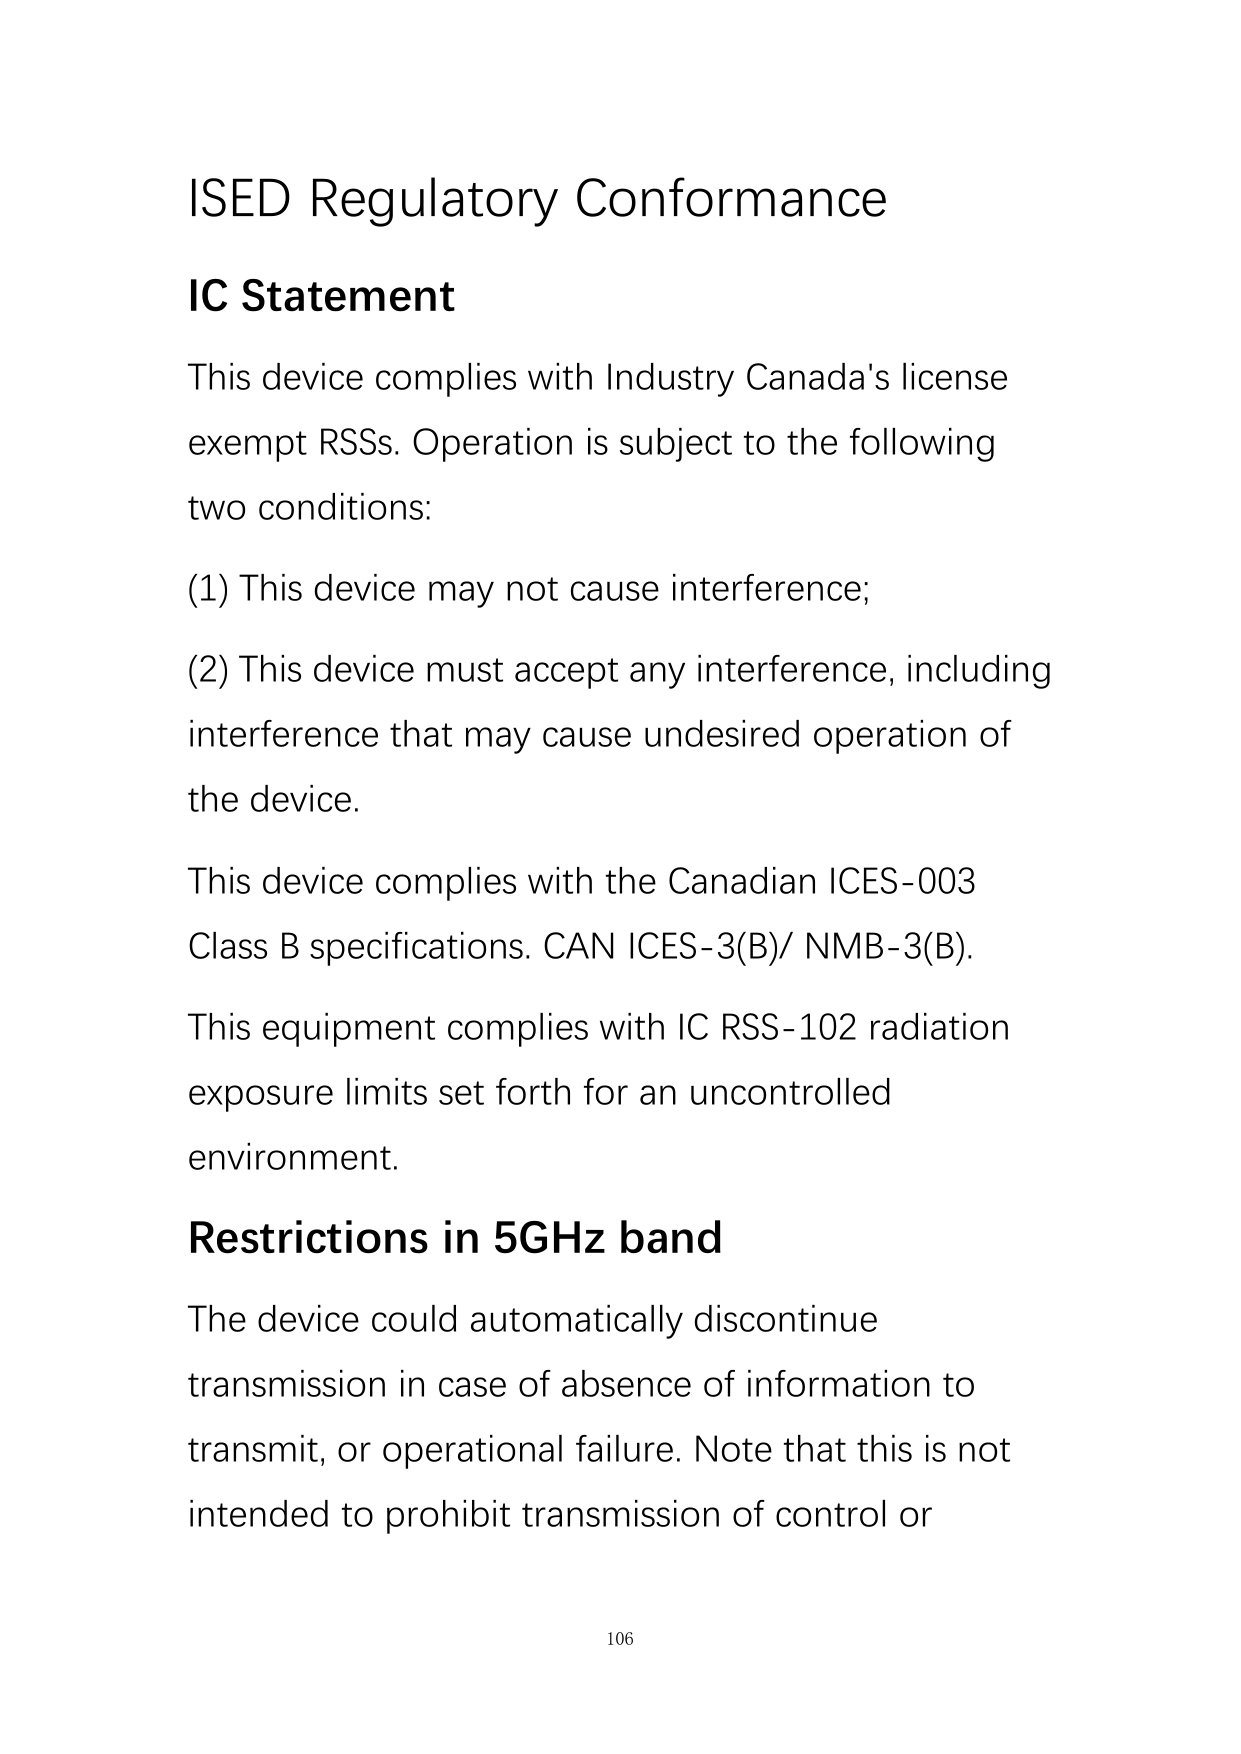 ISED Regulatory ConformanceIC StatementThis device complies with Industry Canada's licenseexempt RSSs. Operation is subject to t